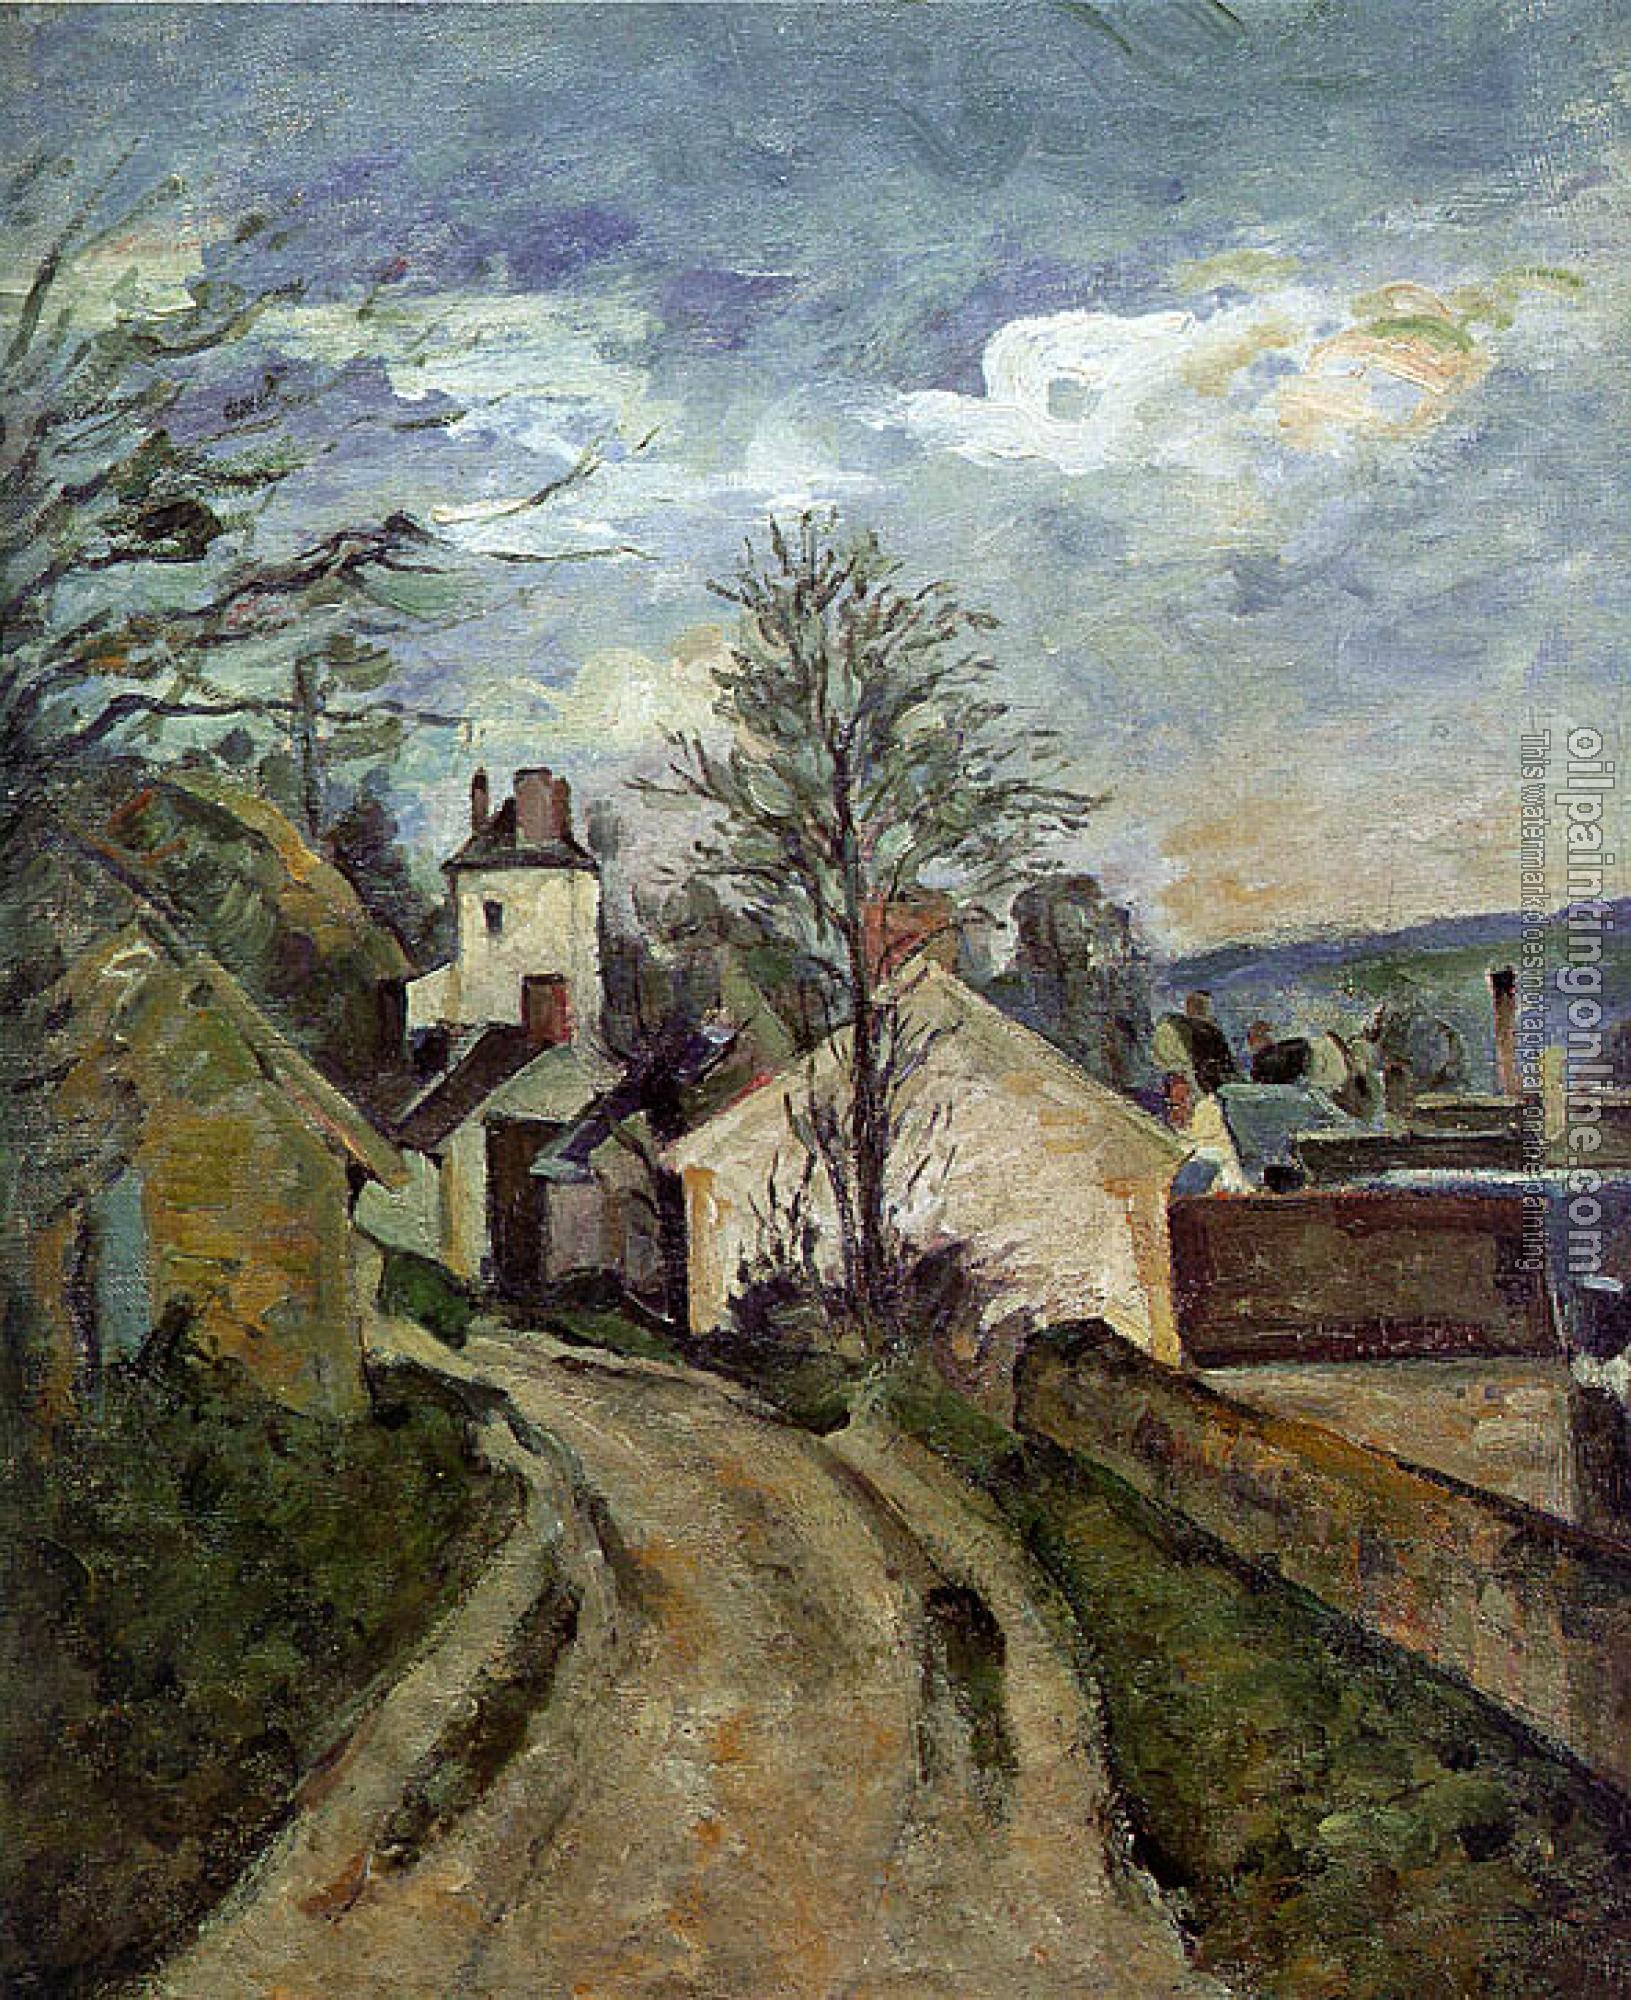 Cezanne, Paul - The House of Dr. Gachet in Auvers